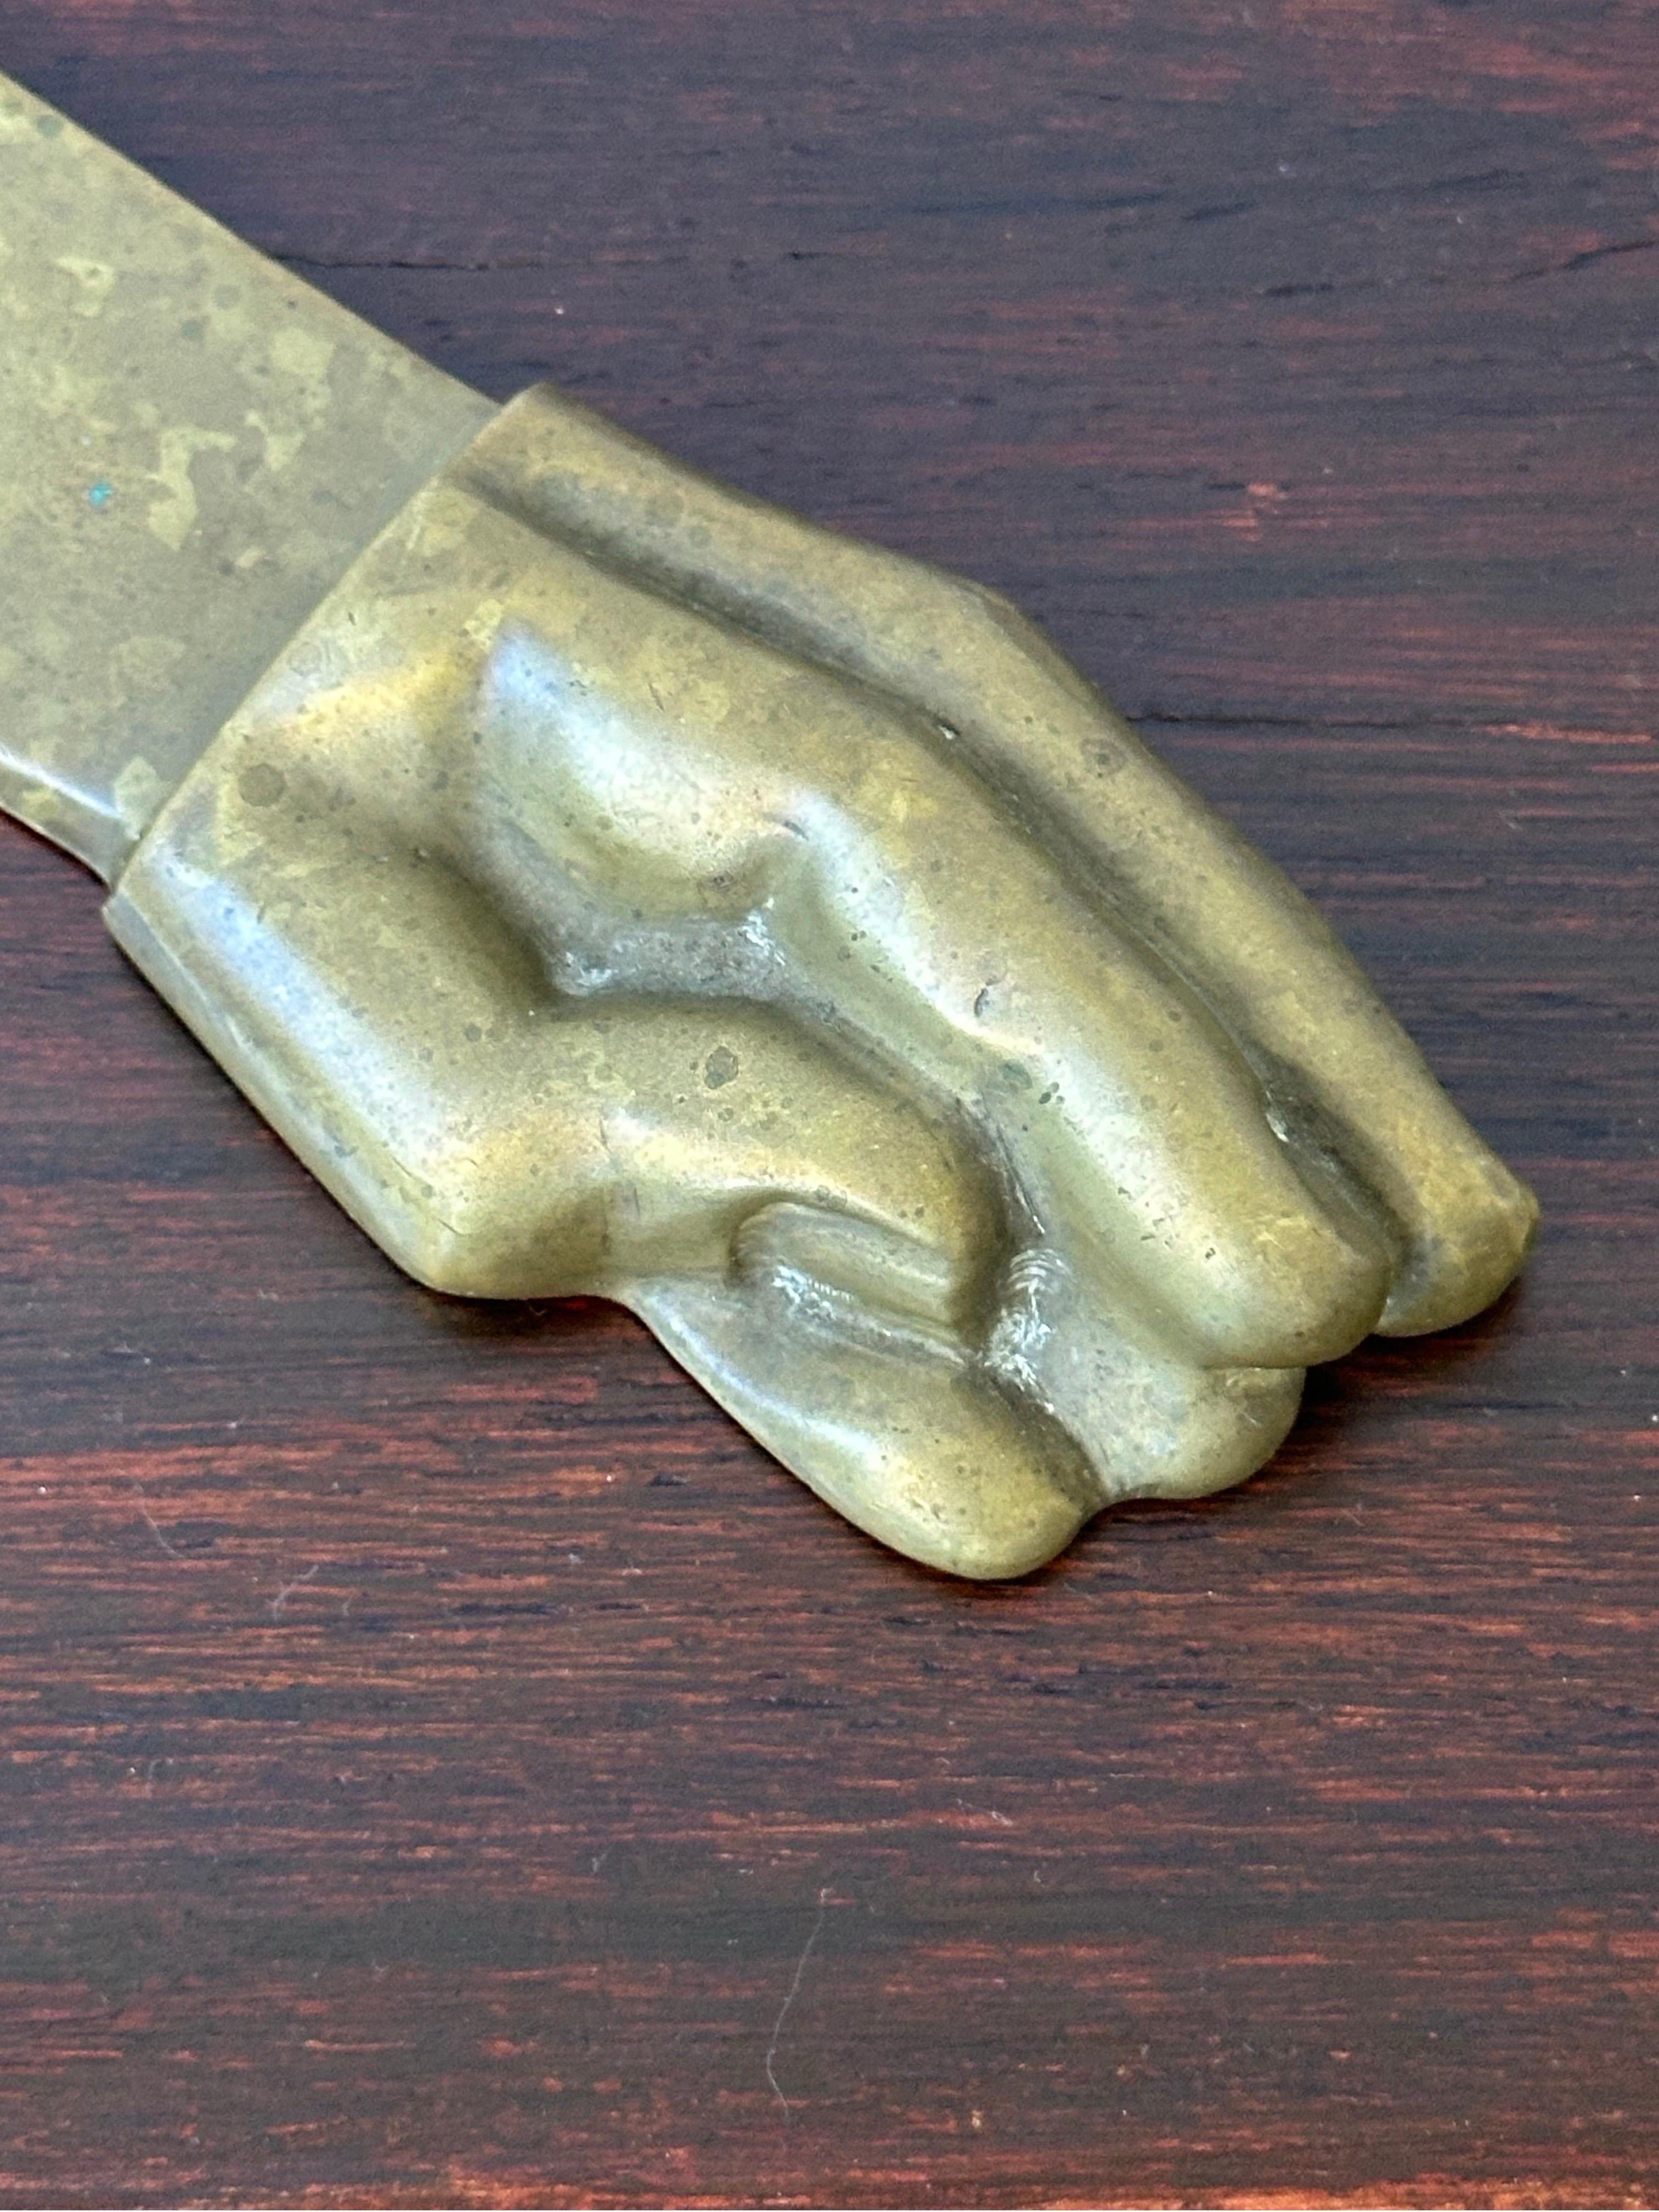 Bronze sculpted letter opener with a handle resembling a hand by Brazilian artist and sculptor Pietrina Checcacci, 1970s.